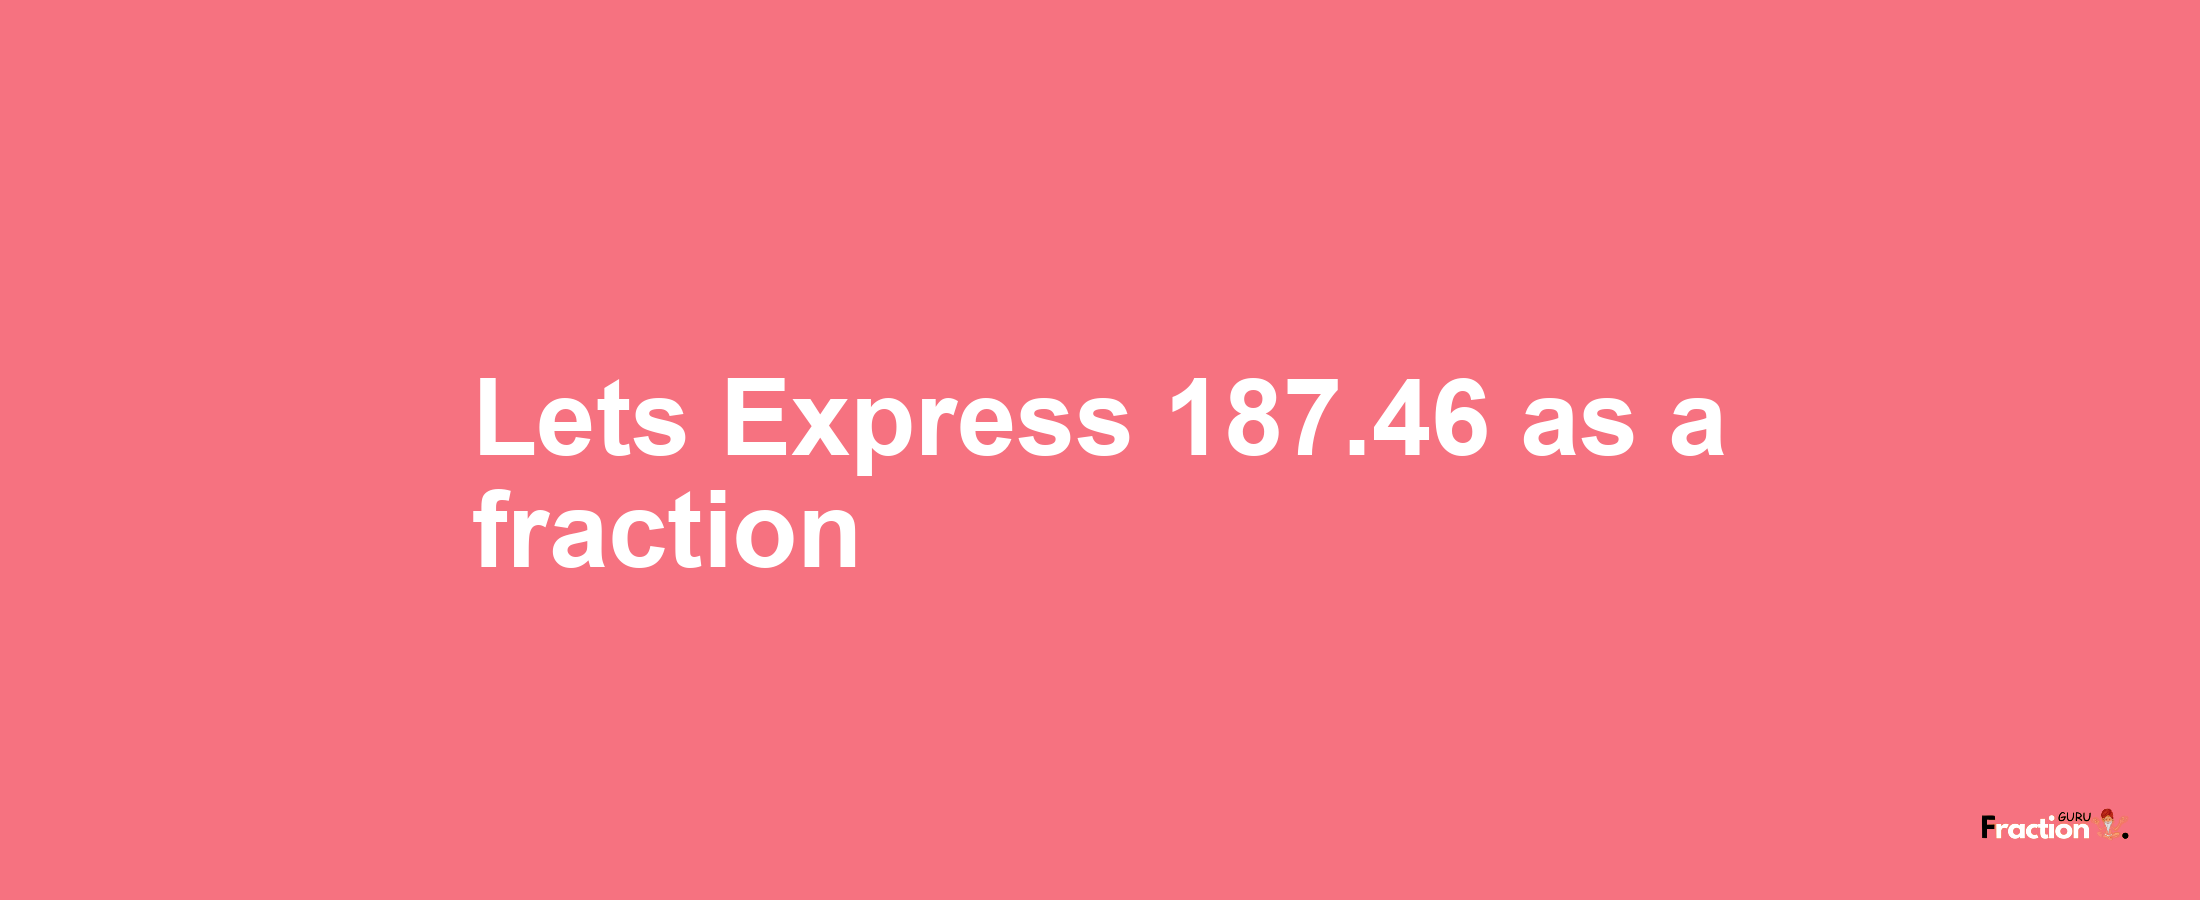 Lets Express 187.46 as afraction